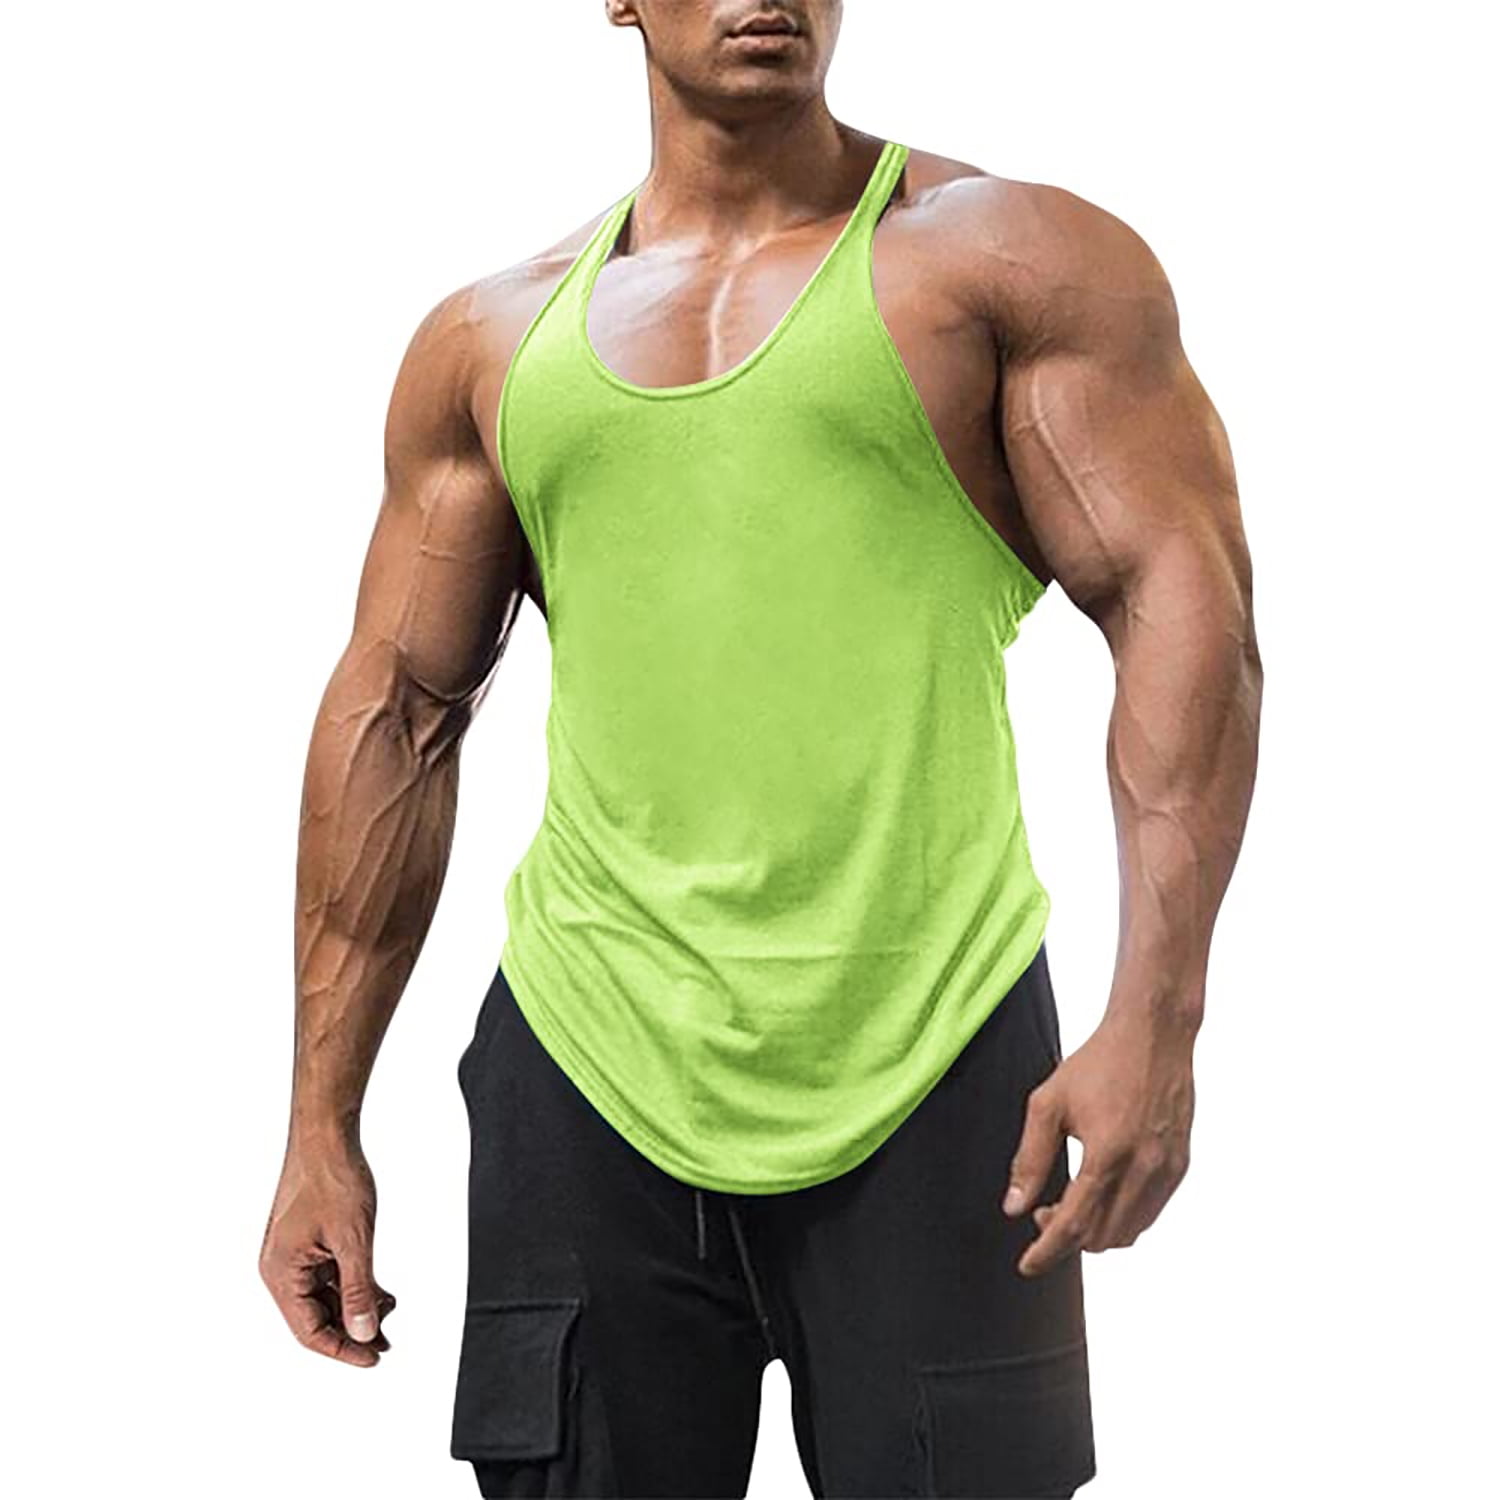 Men Cotton Gym Fitness Workout Muscle Sleeveless Top Bodybuilding